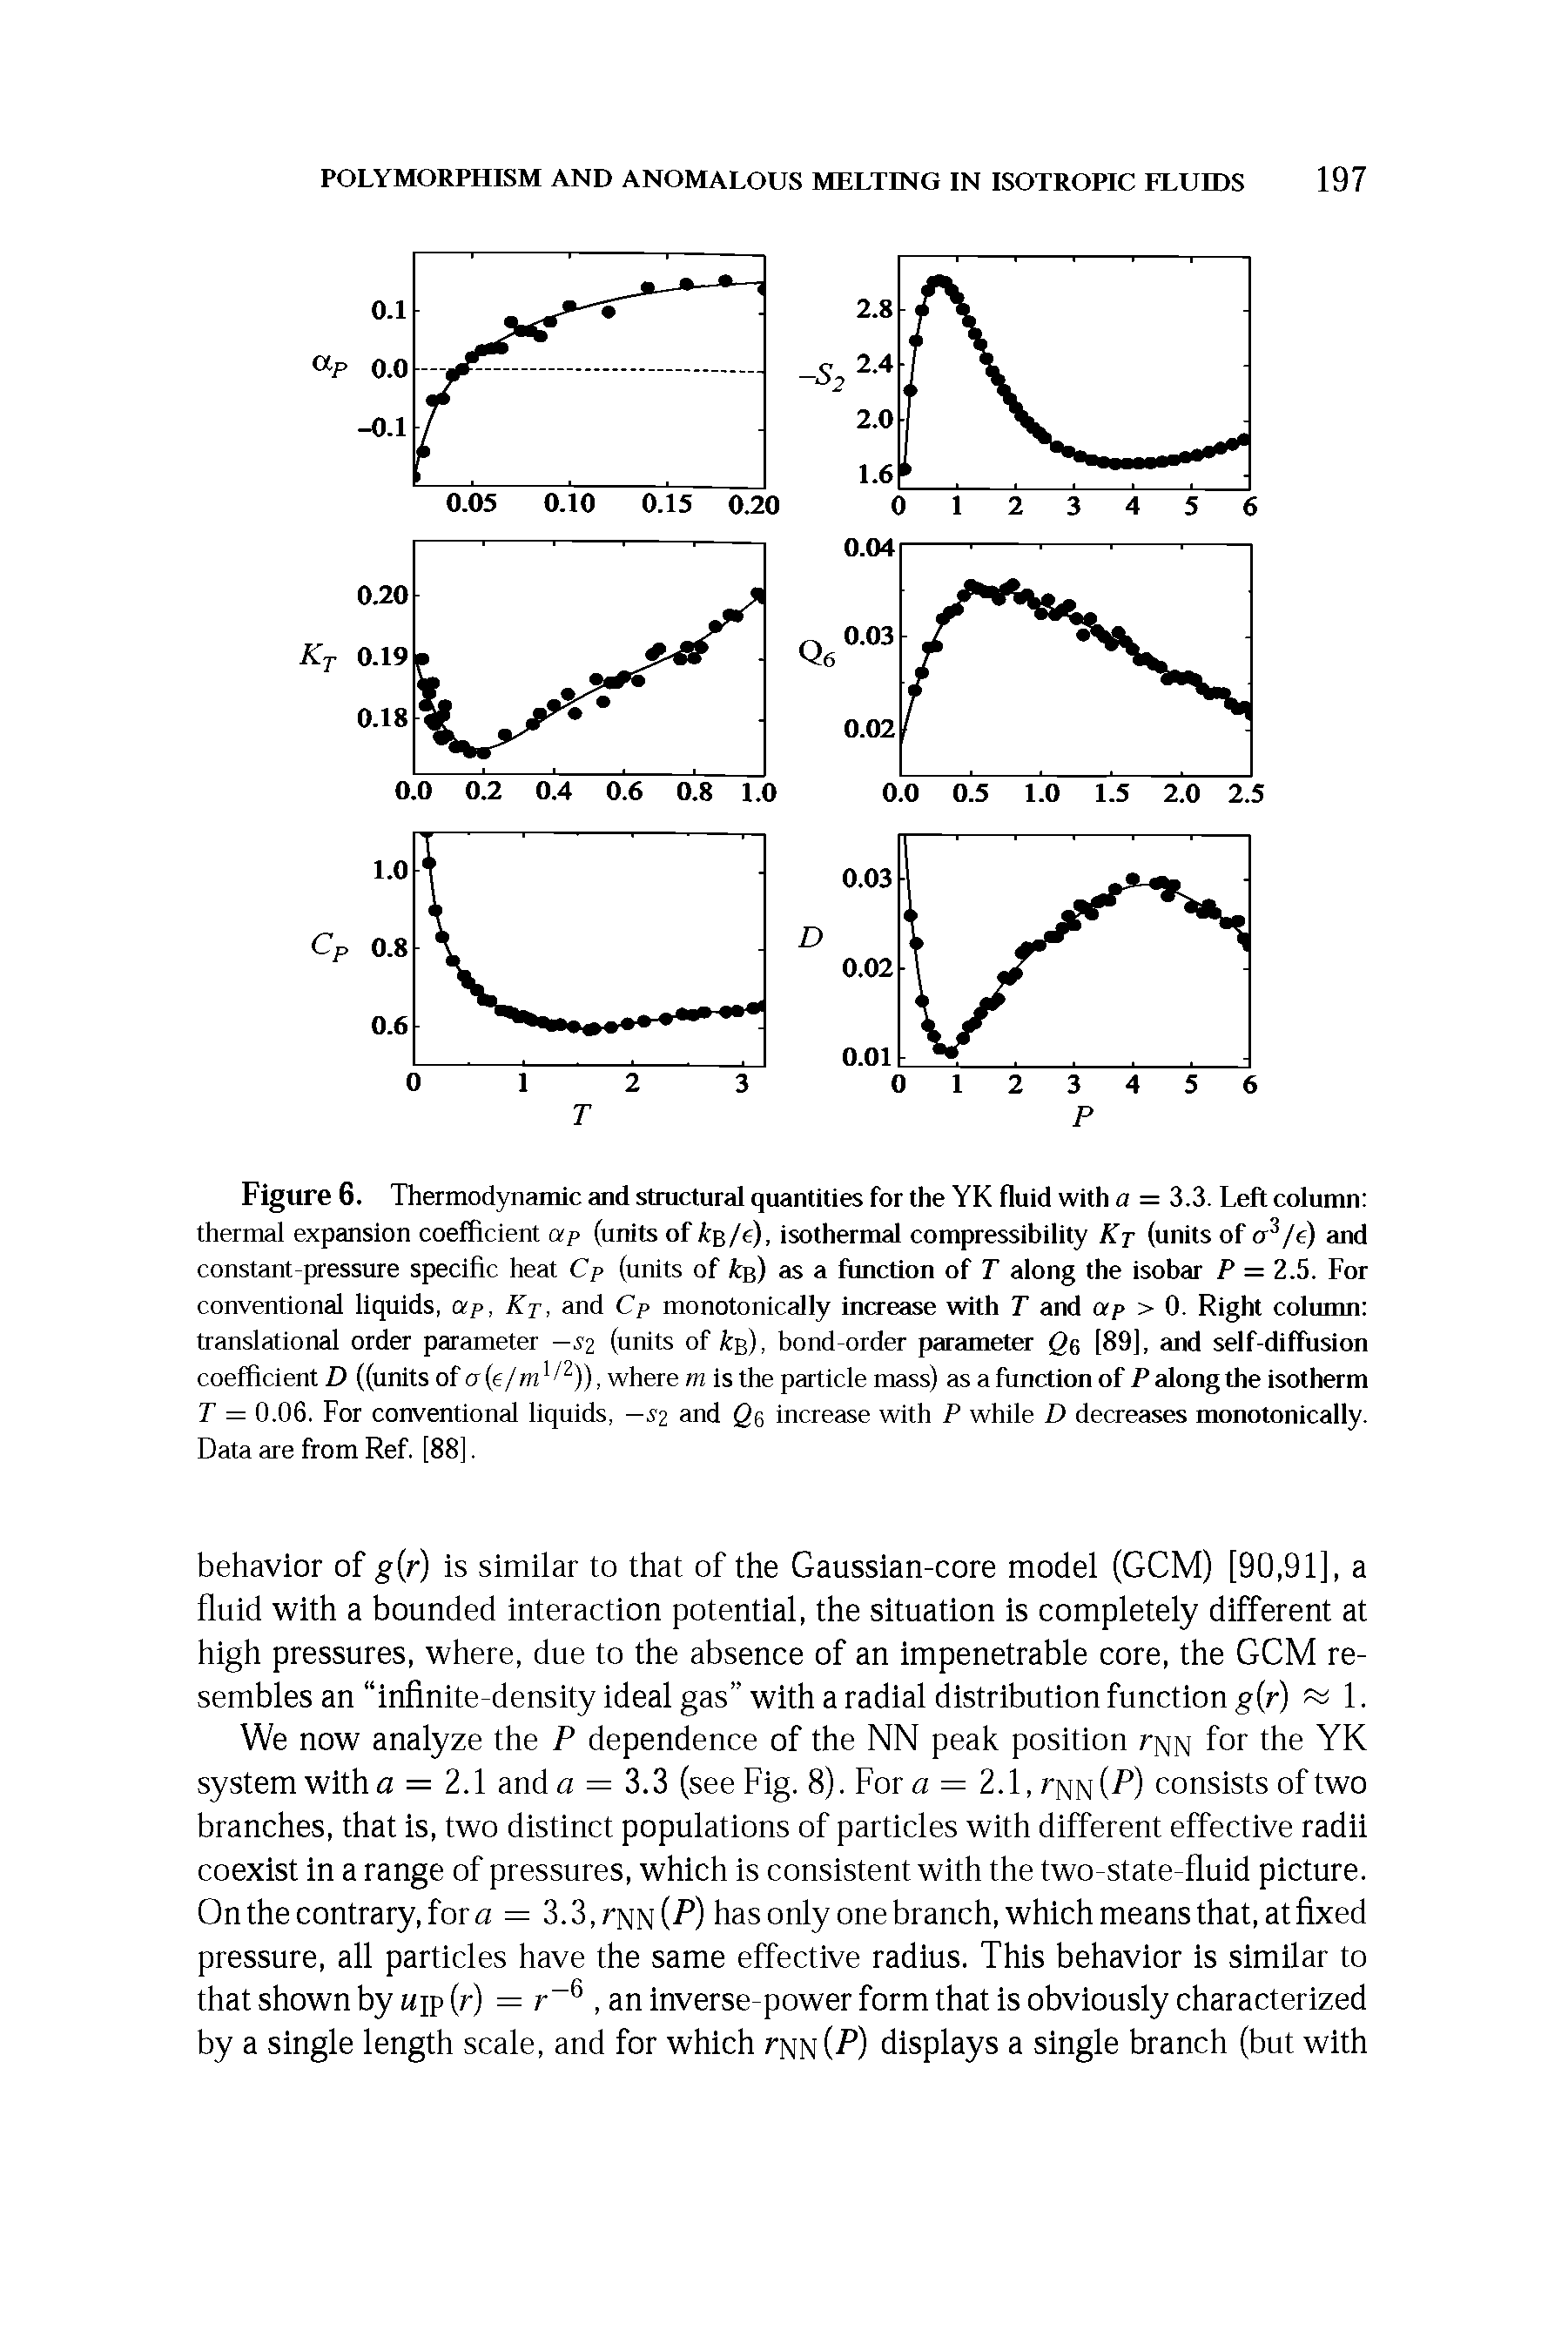 Figure 6. Thermodynamic and structural quantities for the YK fluid with a = 3.3. Left column thermal expansion coefficient ap (units of k /e), isothermal compressibility Kp (units of o /e) and constant-pressure specific heat Cp (units of b) as a function of T along the isobar P = 2.5. For conventional liquids, oip, Kp, and Cp monotonically increase with T and ap > 0. Right column translational order parameter —sz (units of ks), bond-order parameter ge [89). and self-diffusion coefficient D ((units of cr (e/m / )), where m is the particle mass) as a function of P along the isotherm T = 0.06. For conventional liquids, —sz and ge increase with P while D decreases monotonically. Data are from Ref. [88].